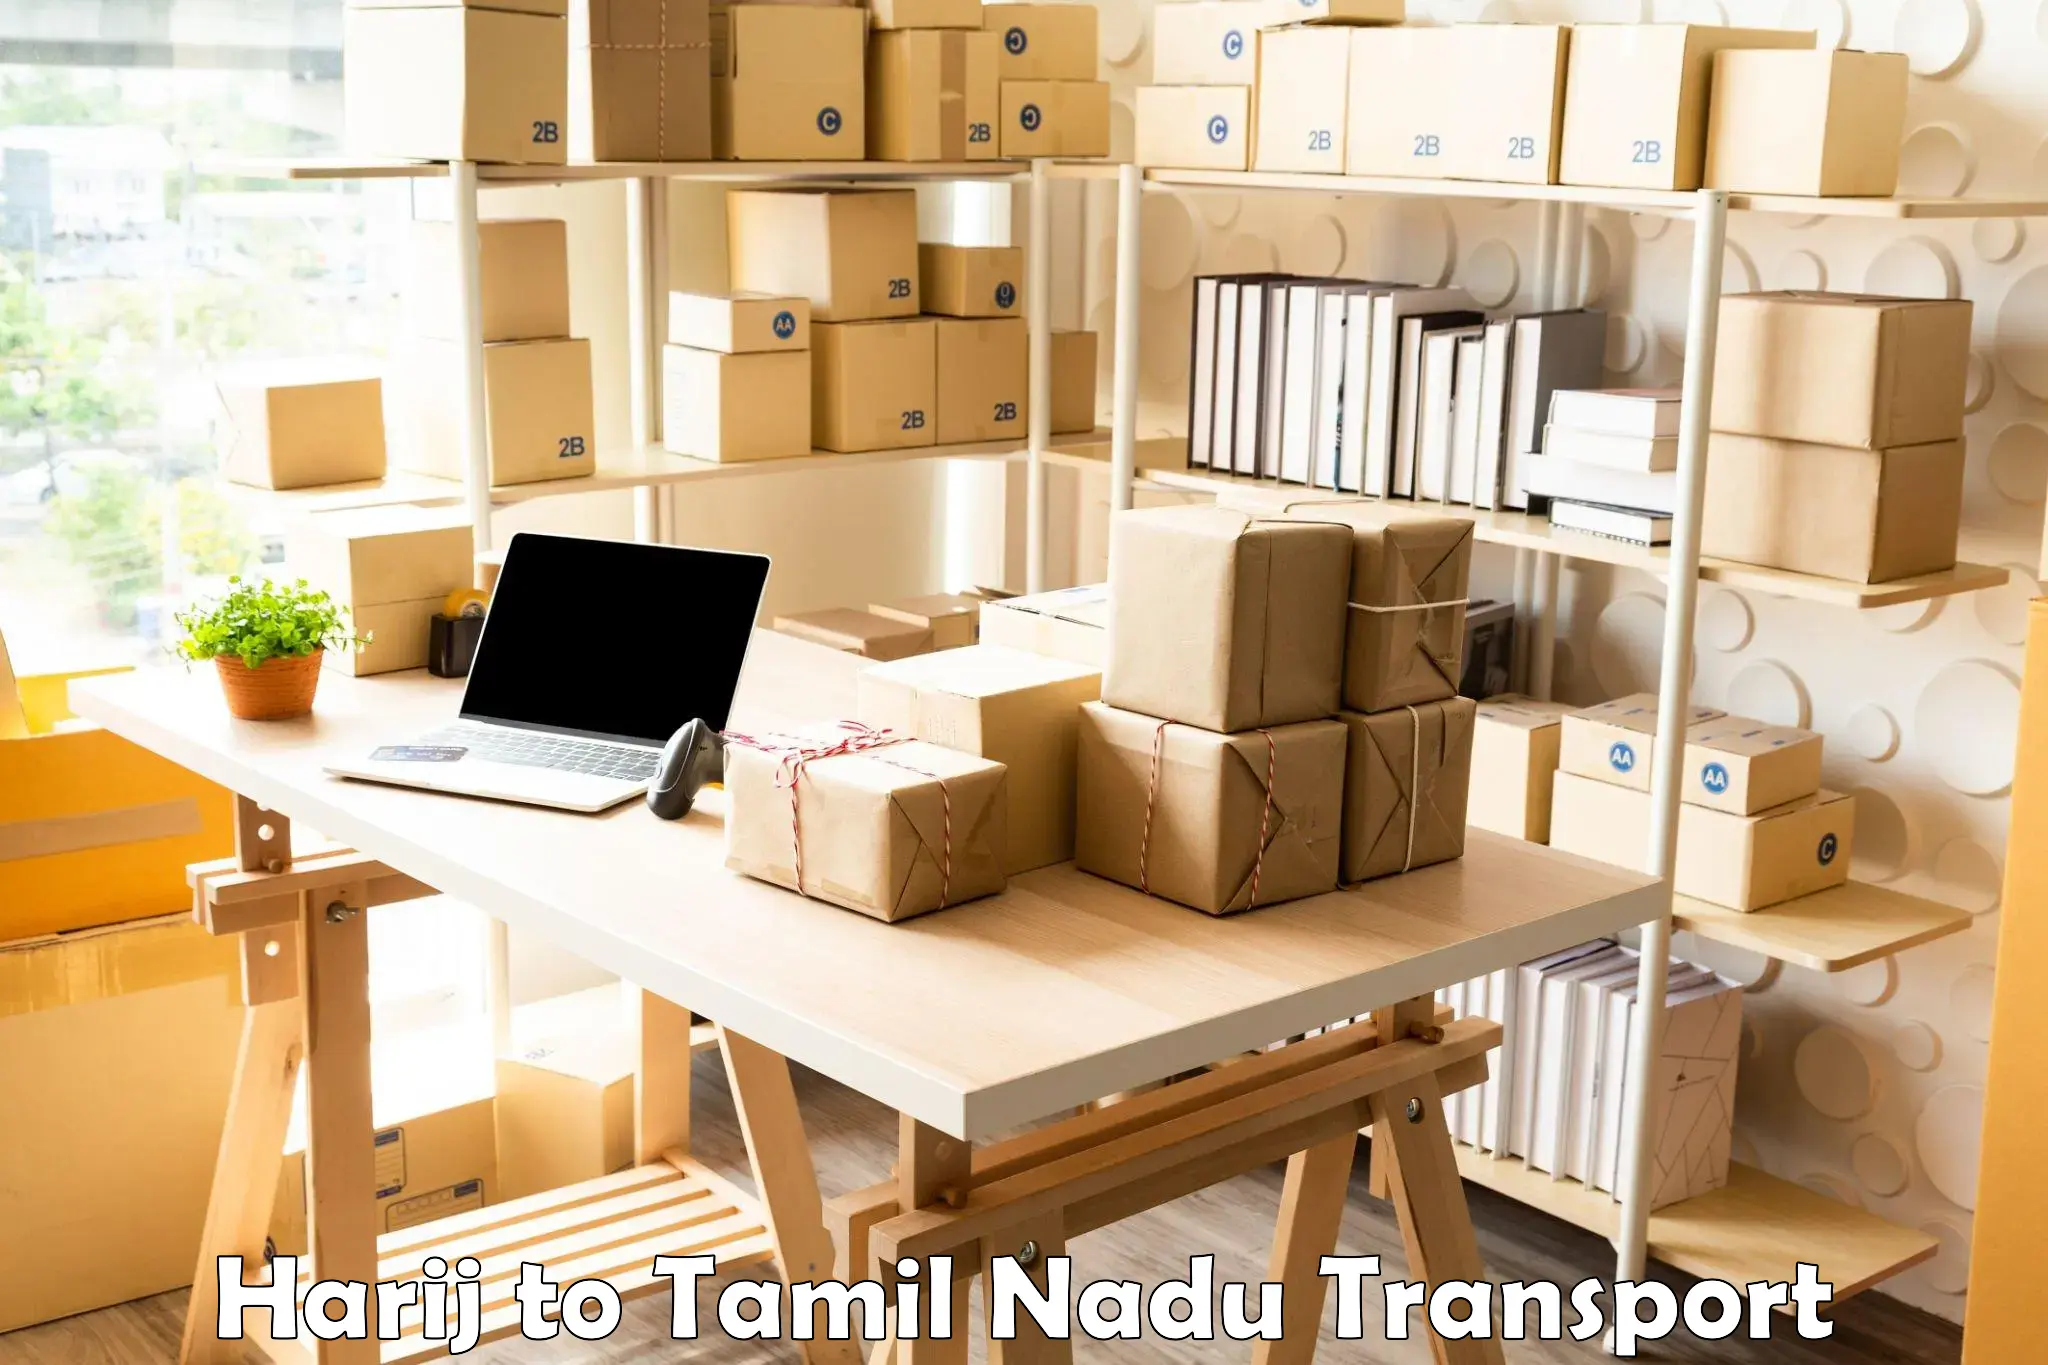 Land transport services Harij to Ennore Port Chennai